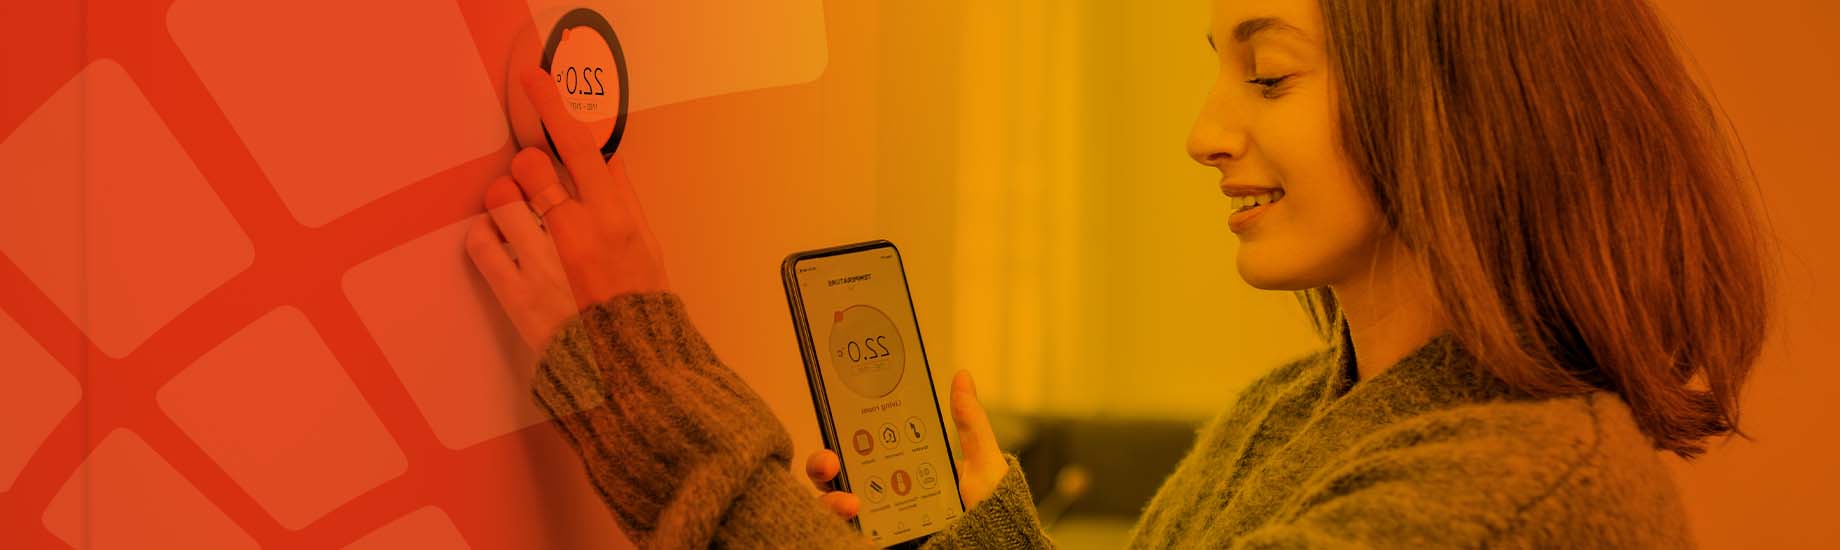 Customer smiling, using smartphone to adjust heating system